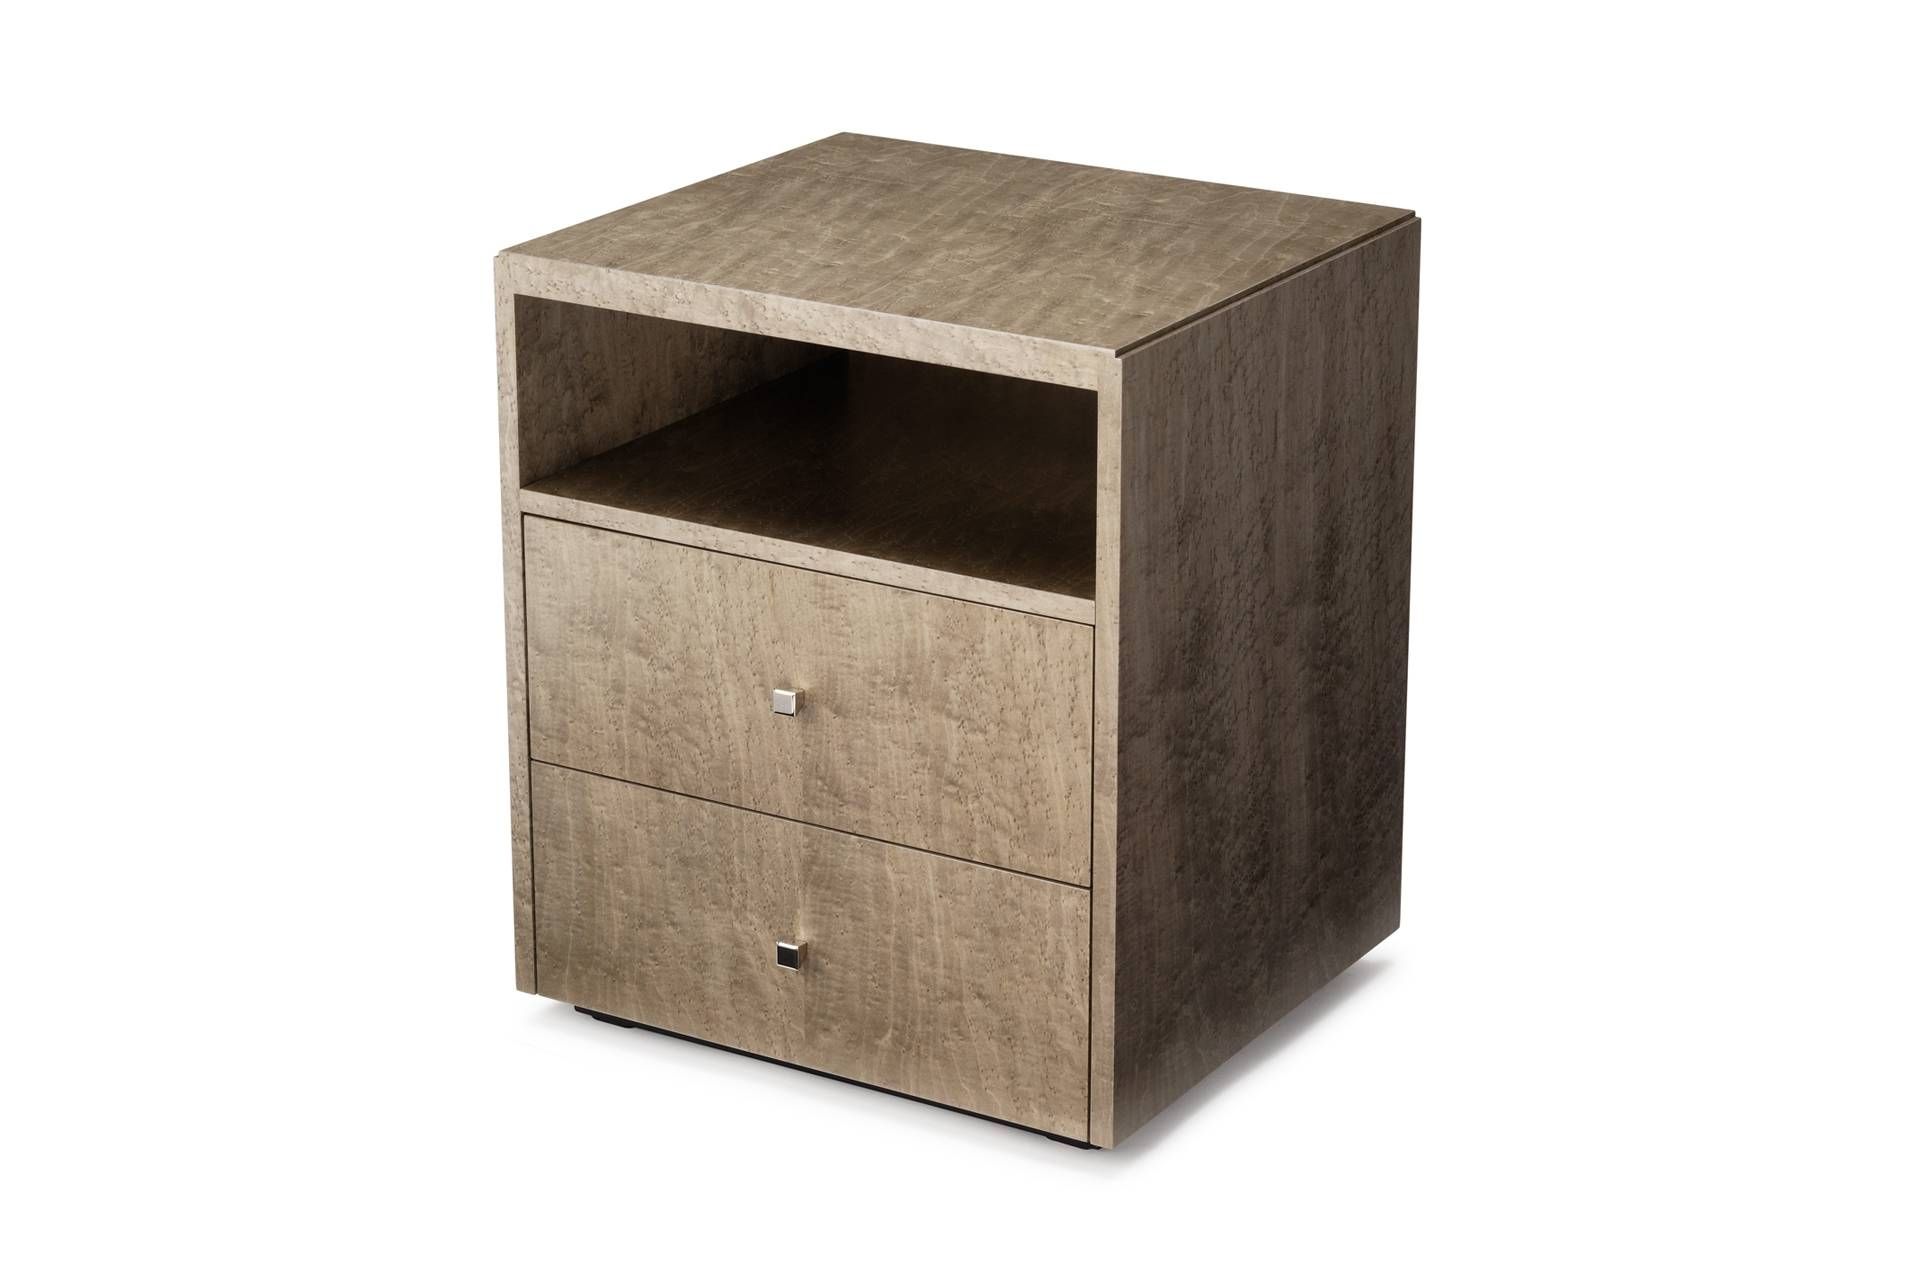 Side Table With Drawers Bedroom Furniture Ideas Wood Material 4 Intended For Small Coffee Tables With Drawer (View 25 of 30)